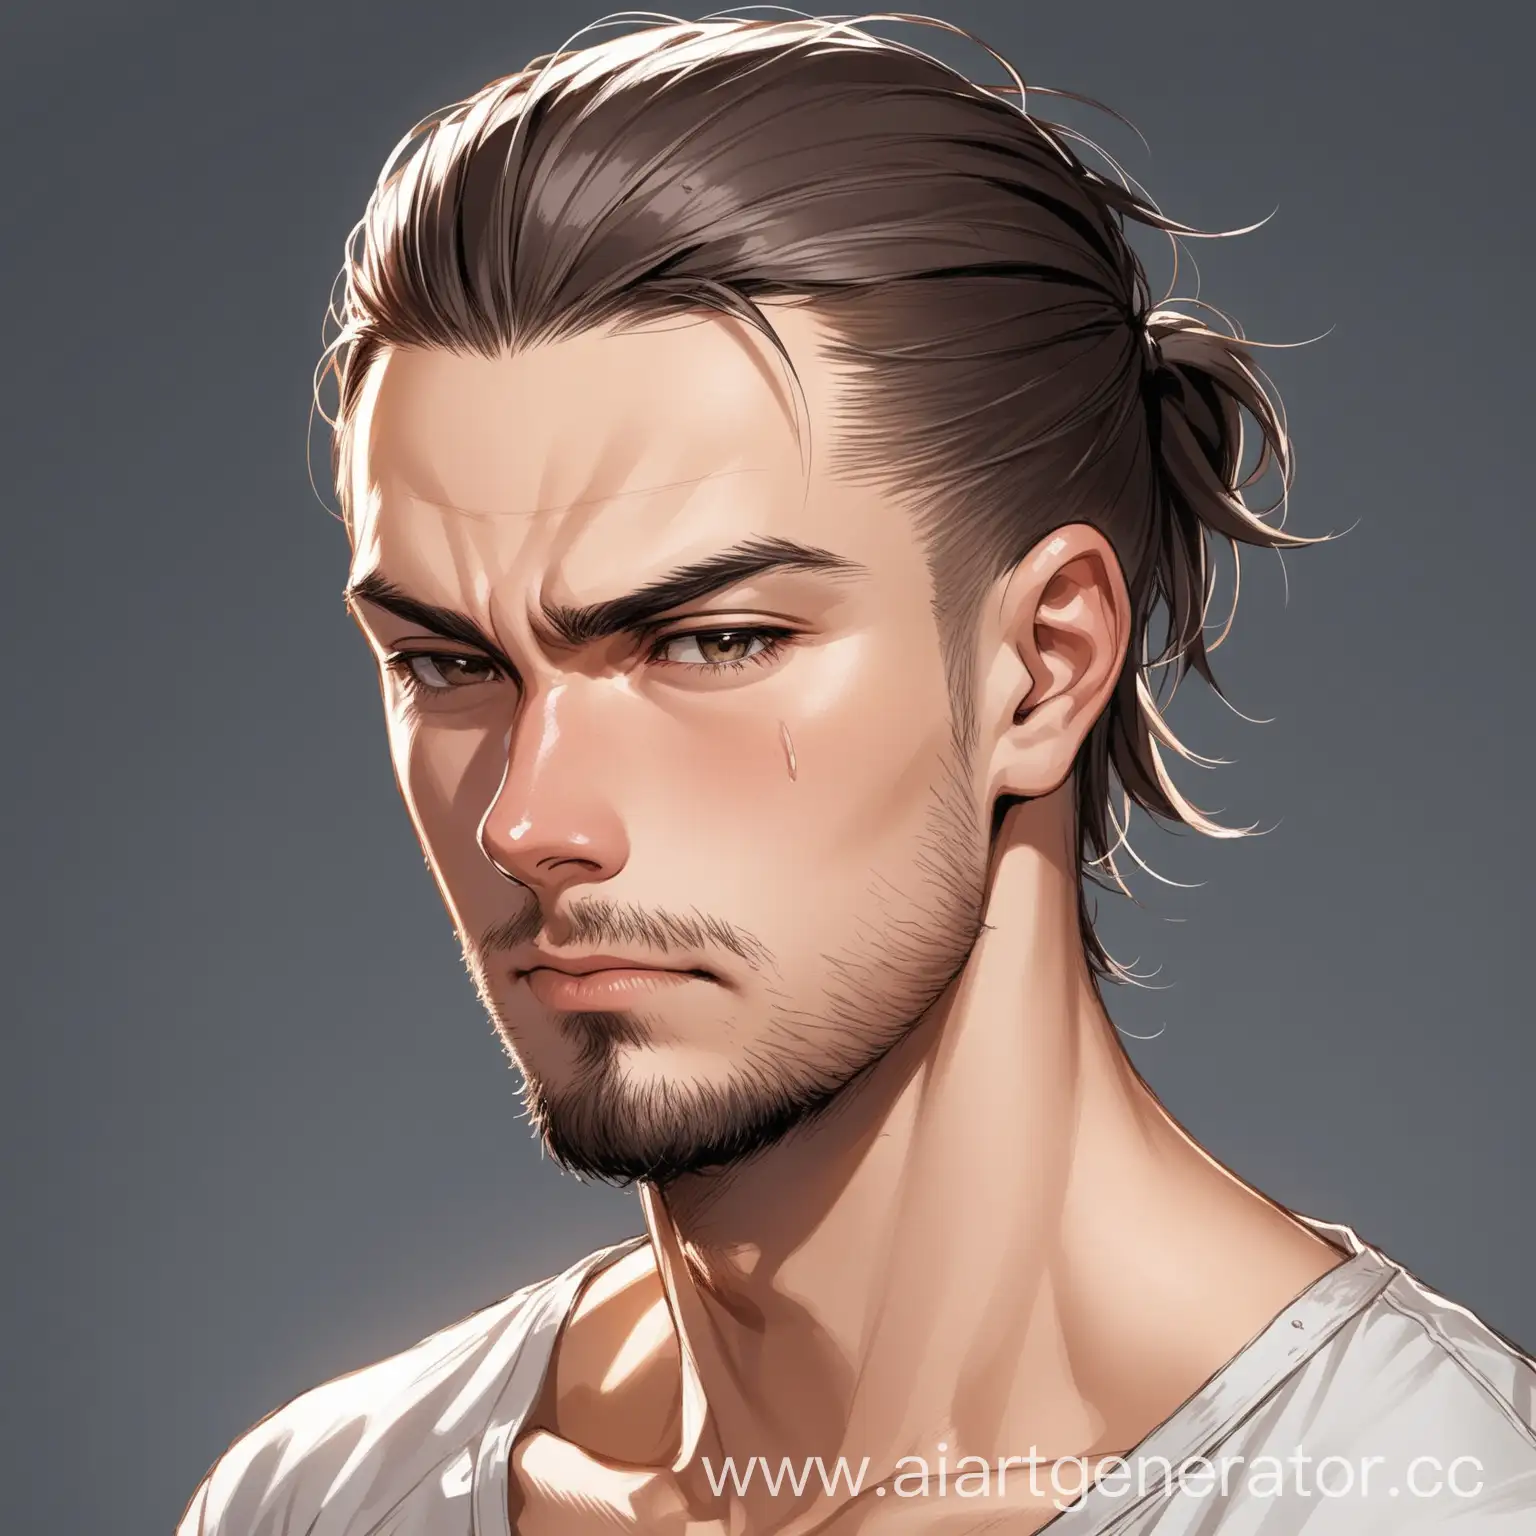 Fatigued-Russian-Man-with-Disheveled-Hair